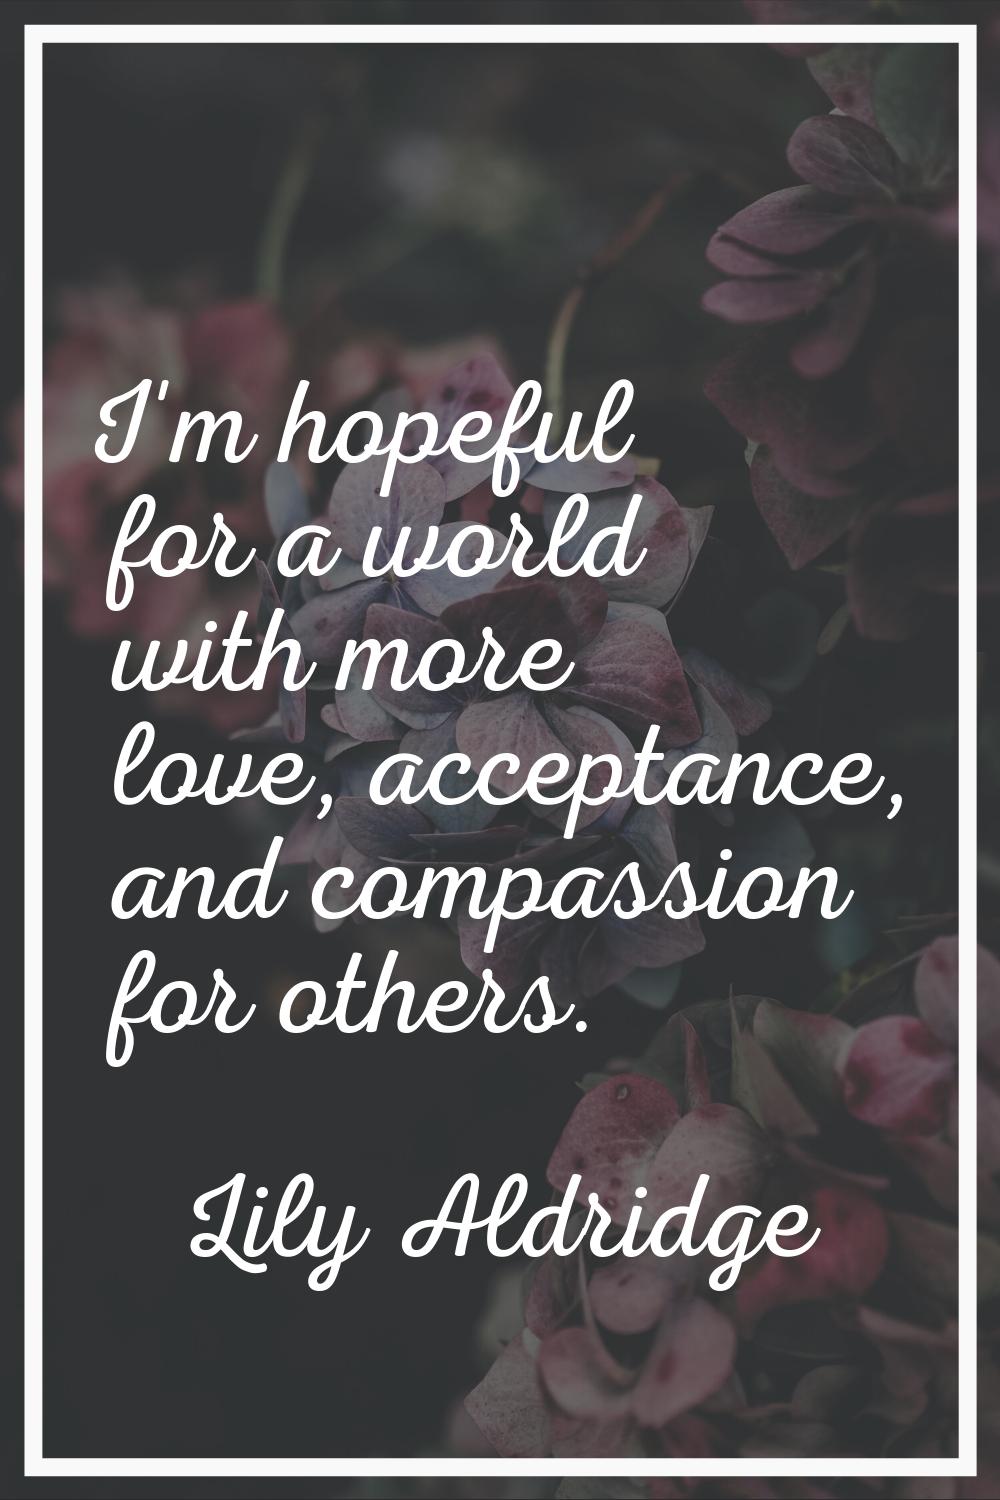 I'm hopeful for a world with more love, acceptance, and compassion for others.